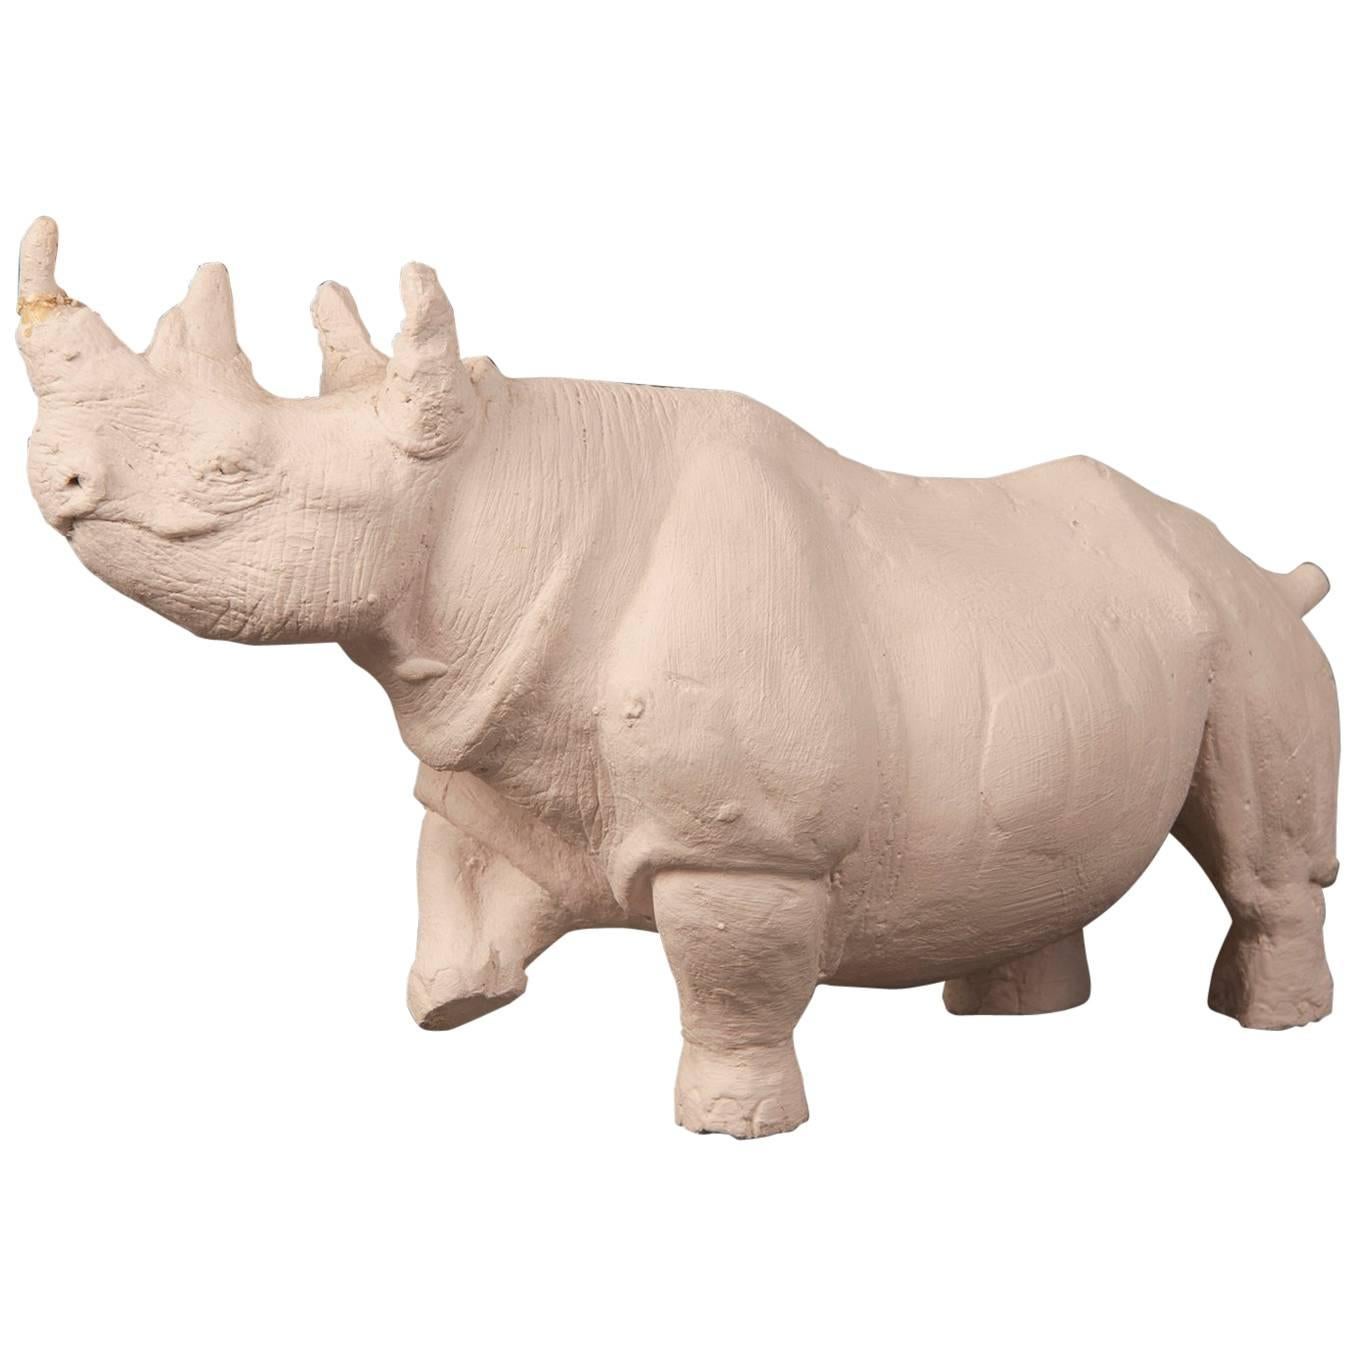 Vintage Rhino Plaster Maquette Figure from a Private Collection, circa 1960 For Sale